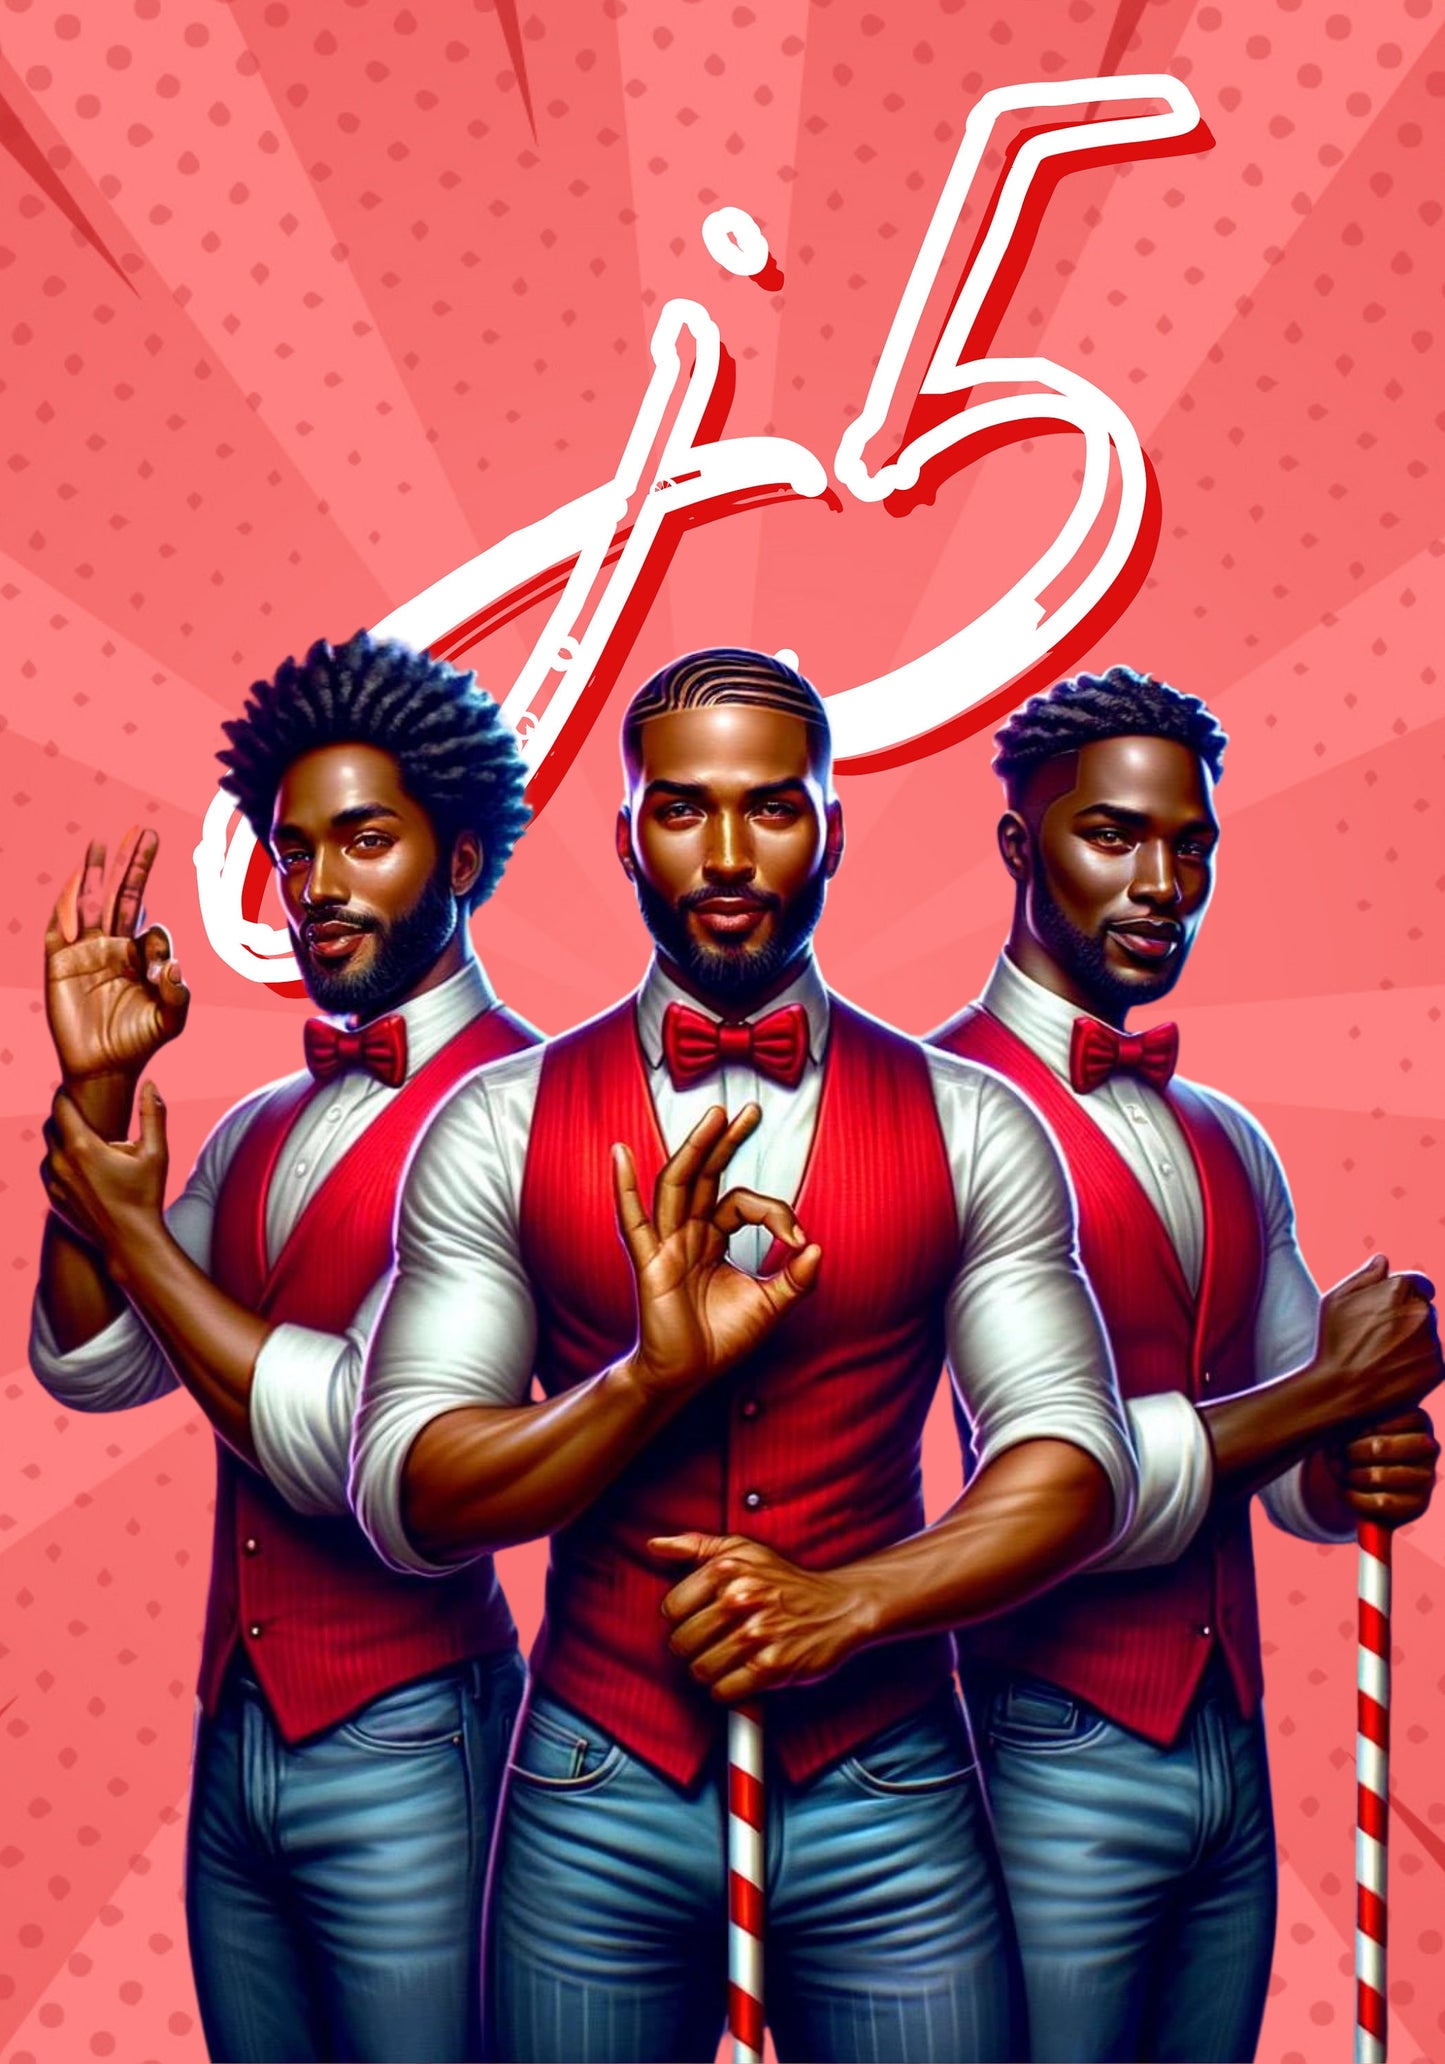 J5 Kappa Alpha Psi | Founders Day| Kappaversary| Pledging Initiation| Black Men 16 Images for Greeting cards Stickers Goodnotes|social media